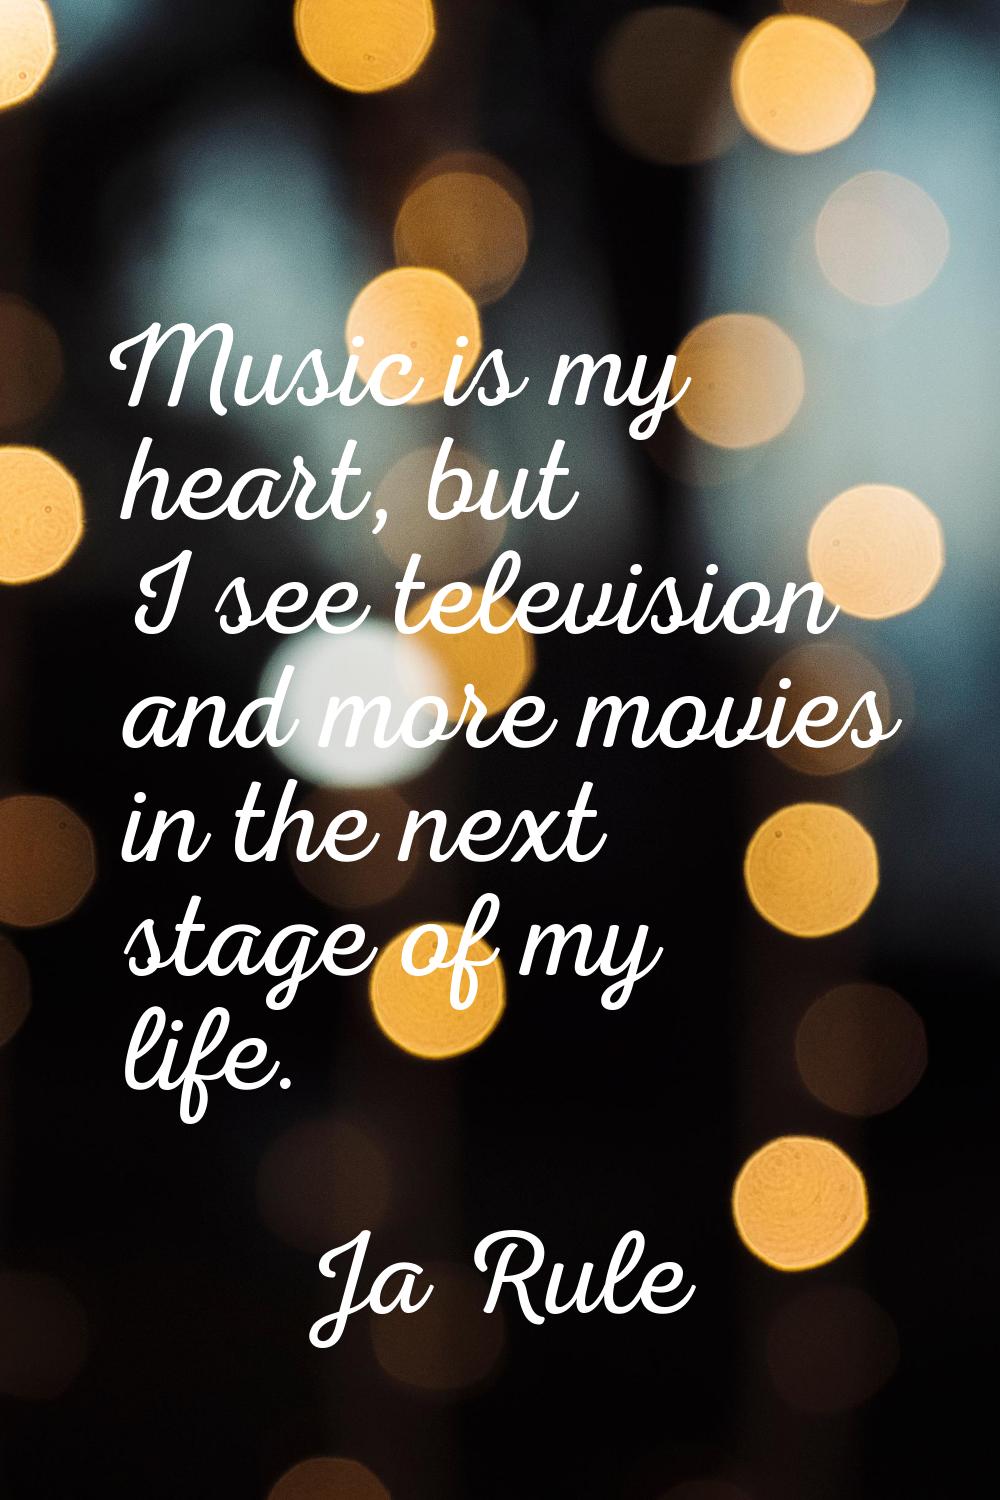 Music is my heart, but I see television and more movies in the next stage of my life.